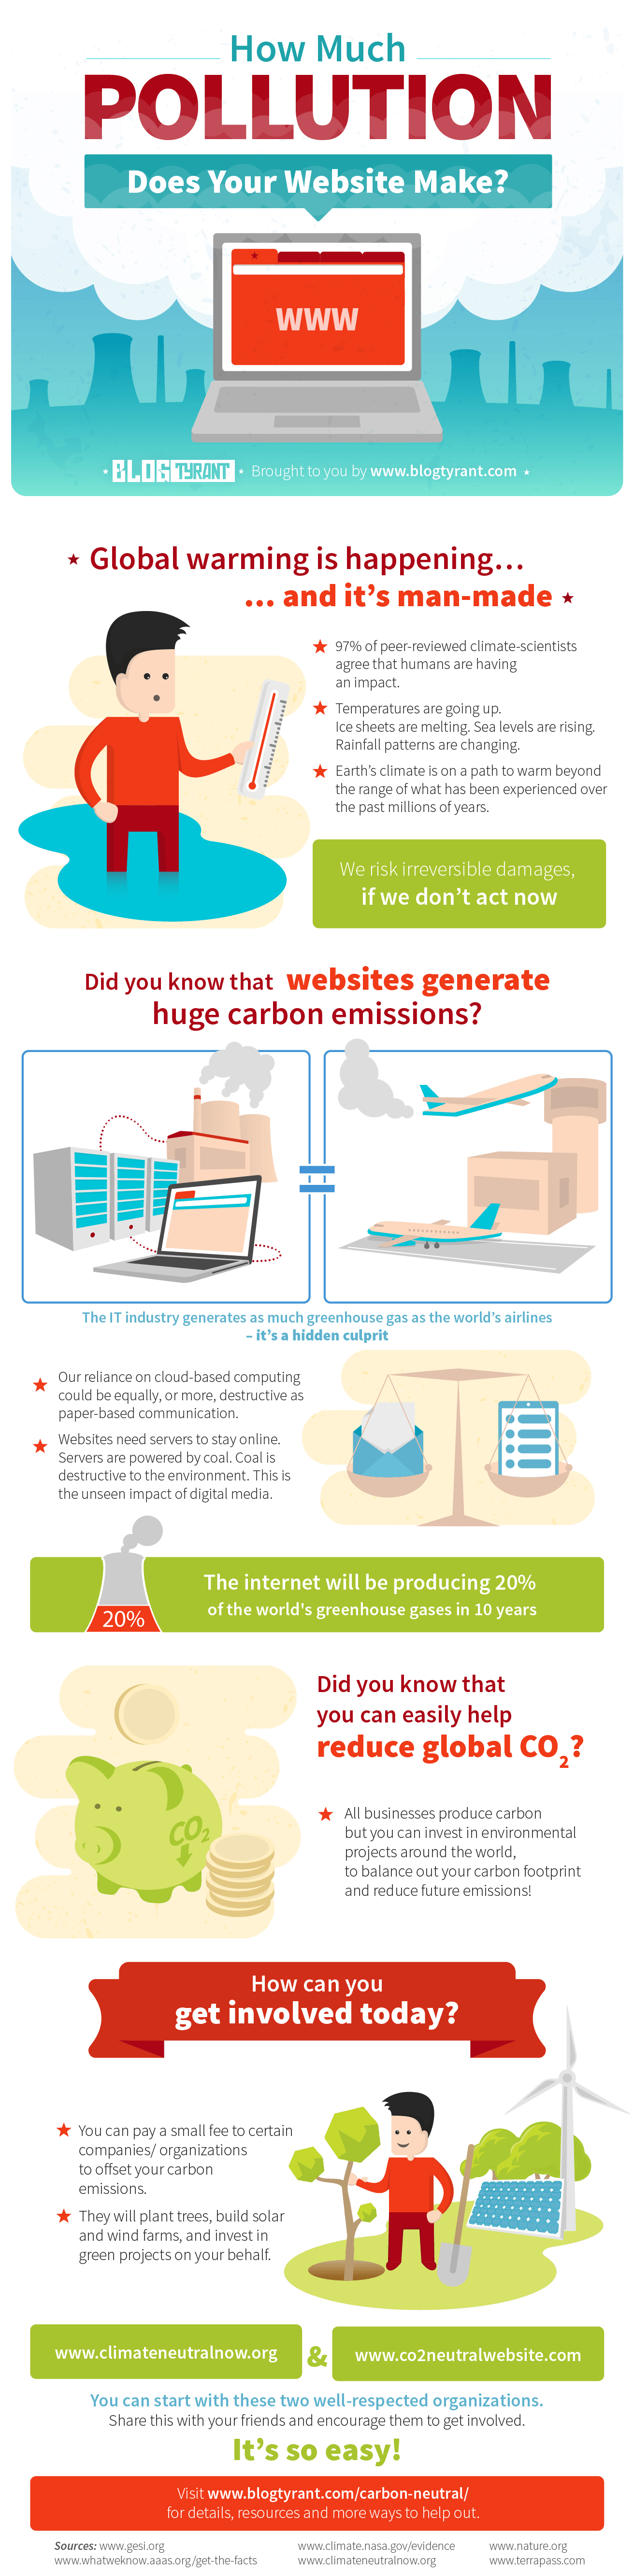 How Much Pollution Does Your Website Make